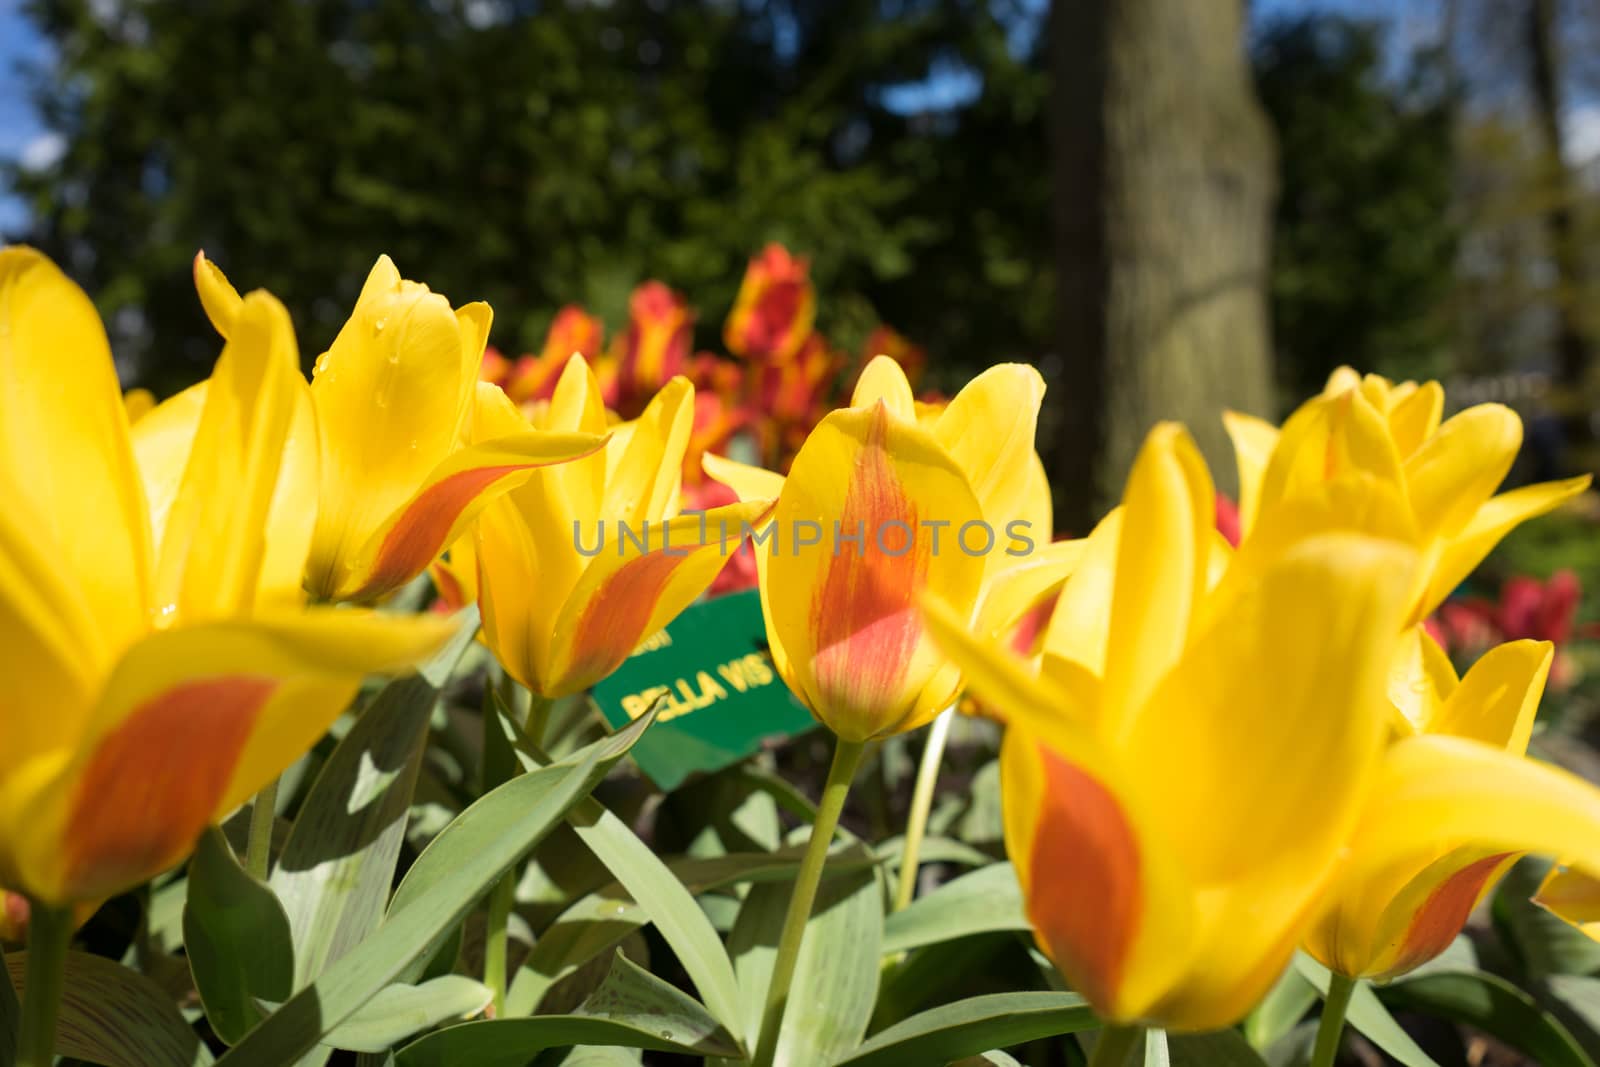 Bella Vista Yellow tulips in a garden in Lisse, Netherlands, Europe with a blurred background on a bright summer day